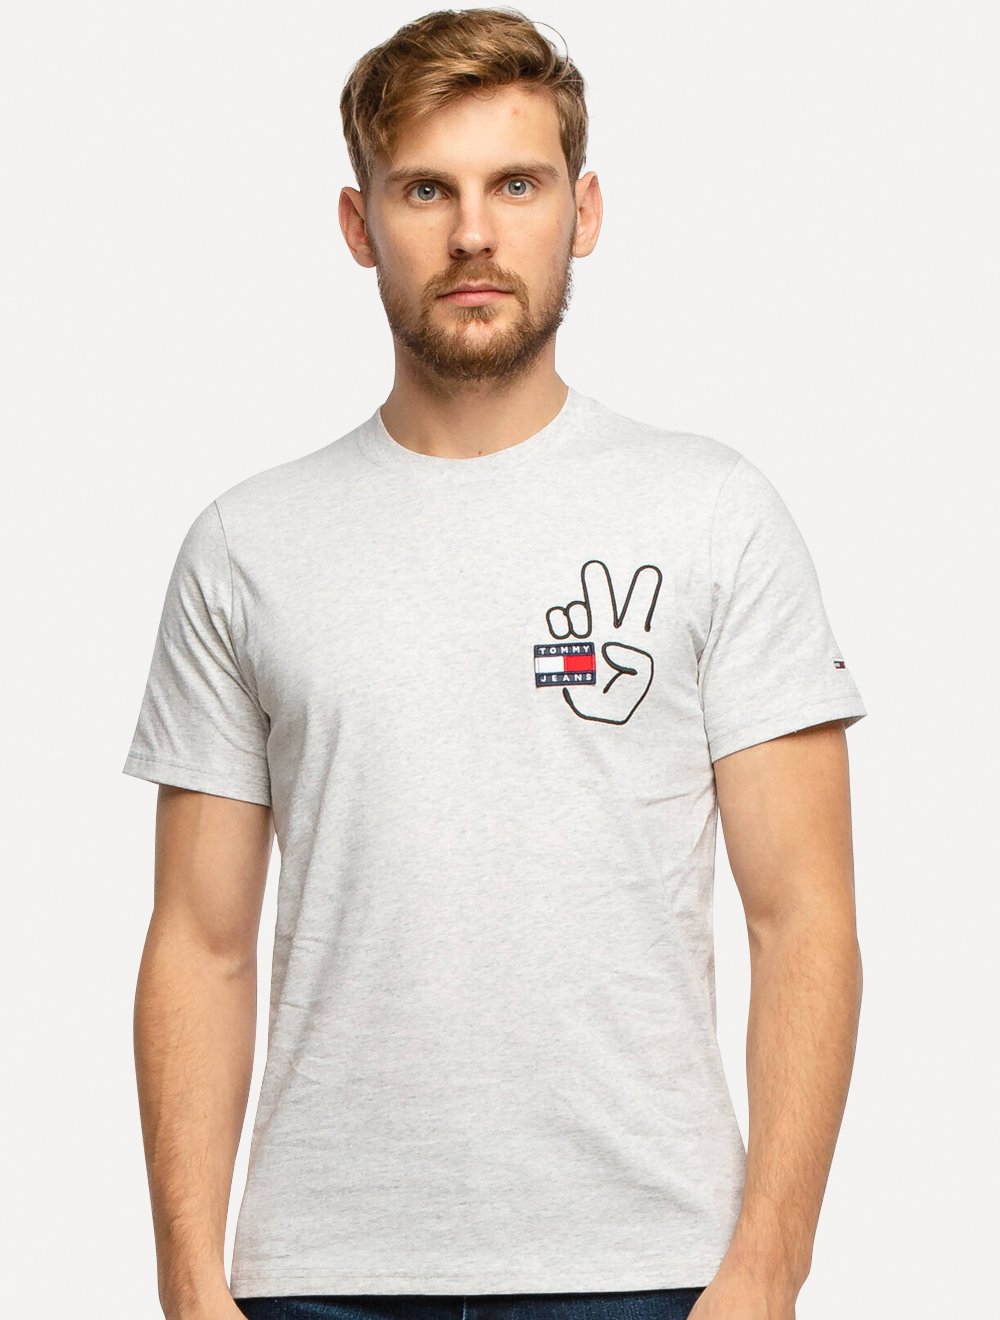 Camiseta Tommy Jeans Masculina Peace Badge Graphic Cinza Mescla